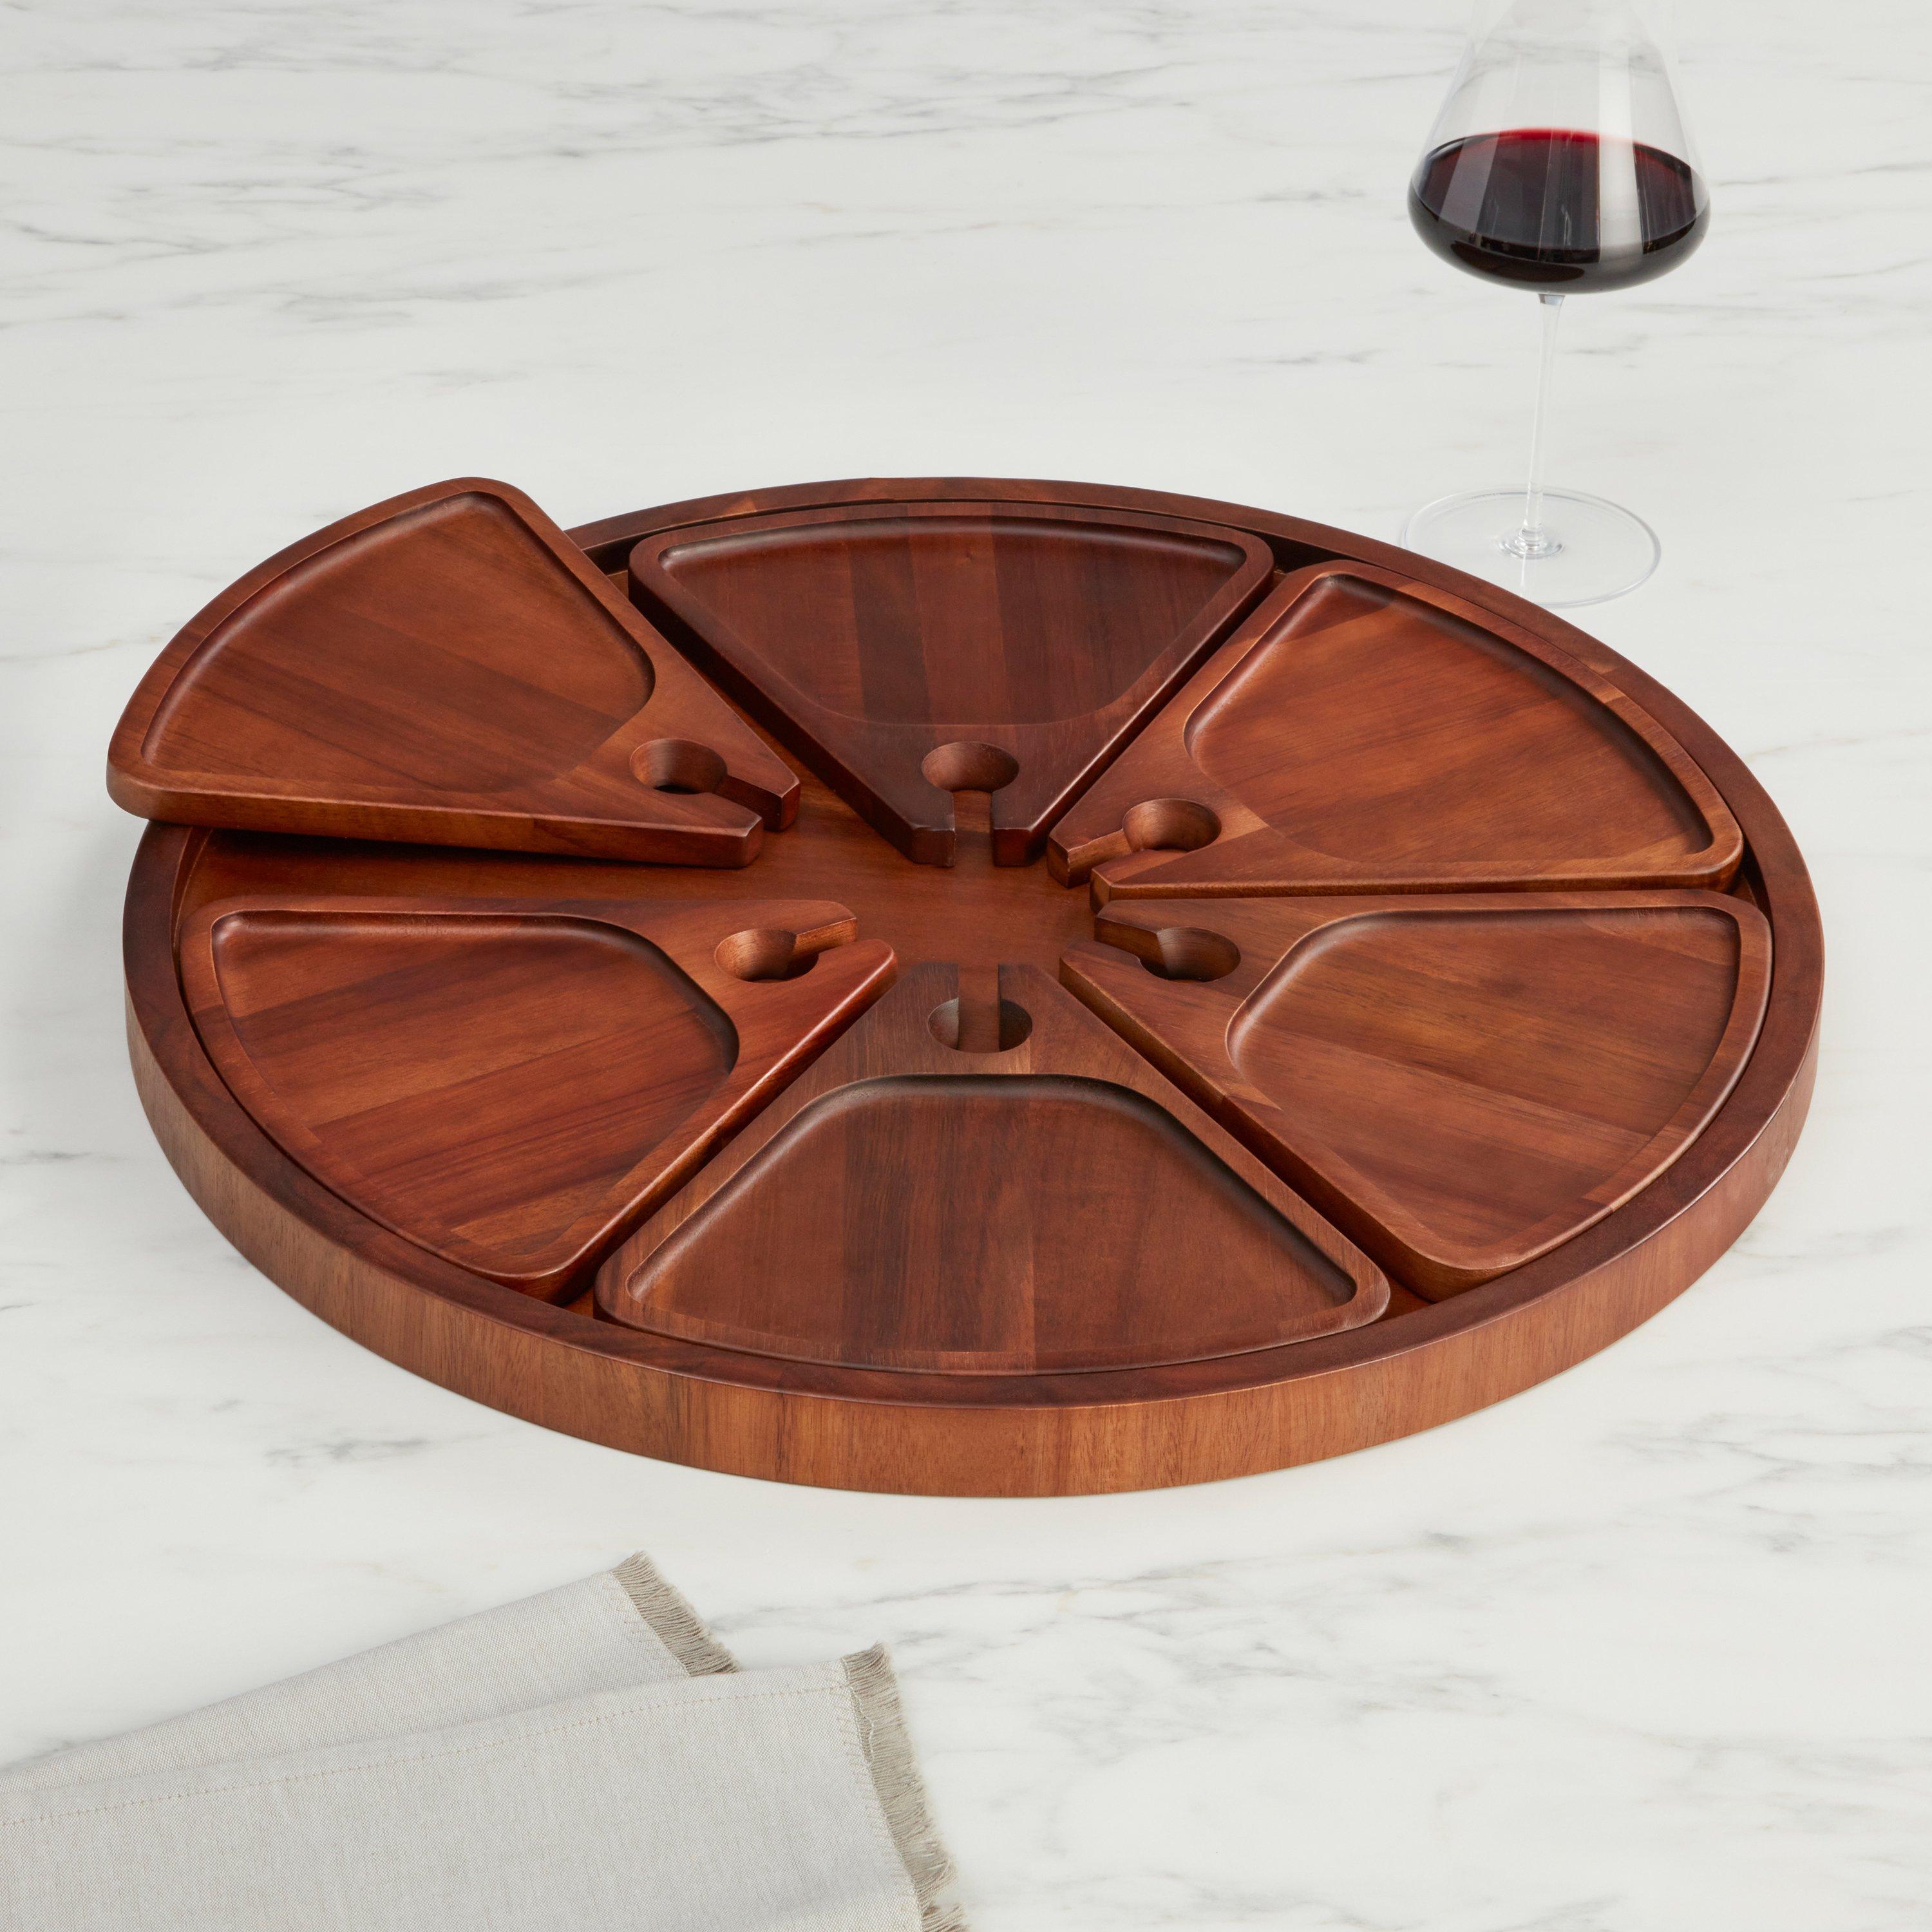 Acacia Wood Serving Board And Cocktail Appetizer Plates With Wine Glass ...